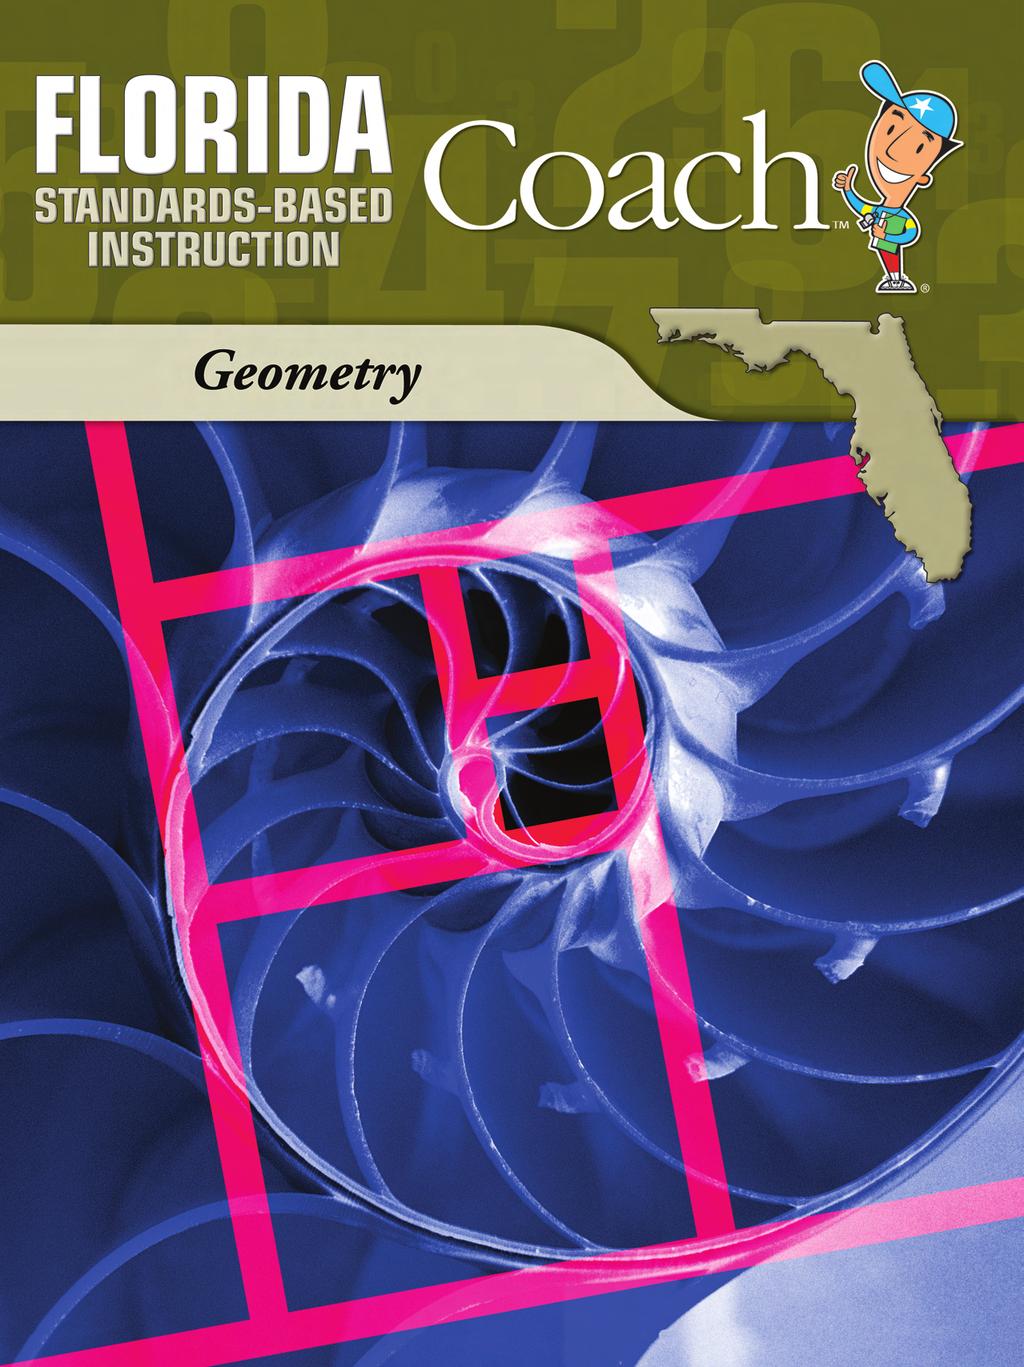 Coach lessons have just what you re looking for: Easy-to-follow, predictable lesson plans Florida Coach, Standards-Based Instruction, Geometry Standards-Based Curriculum Support!